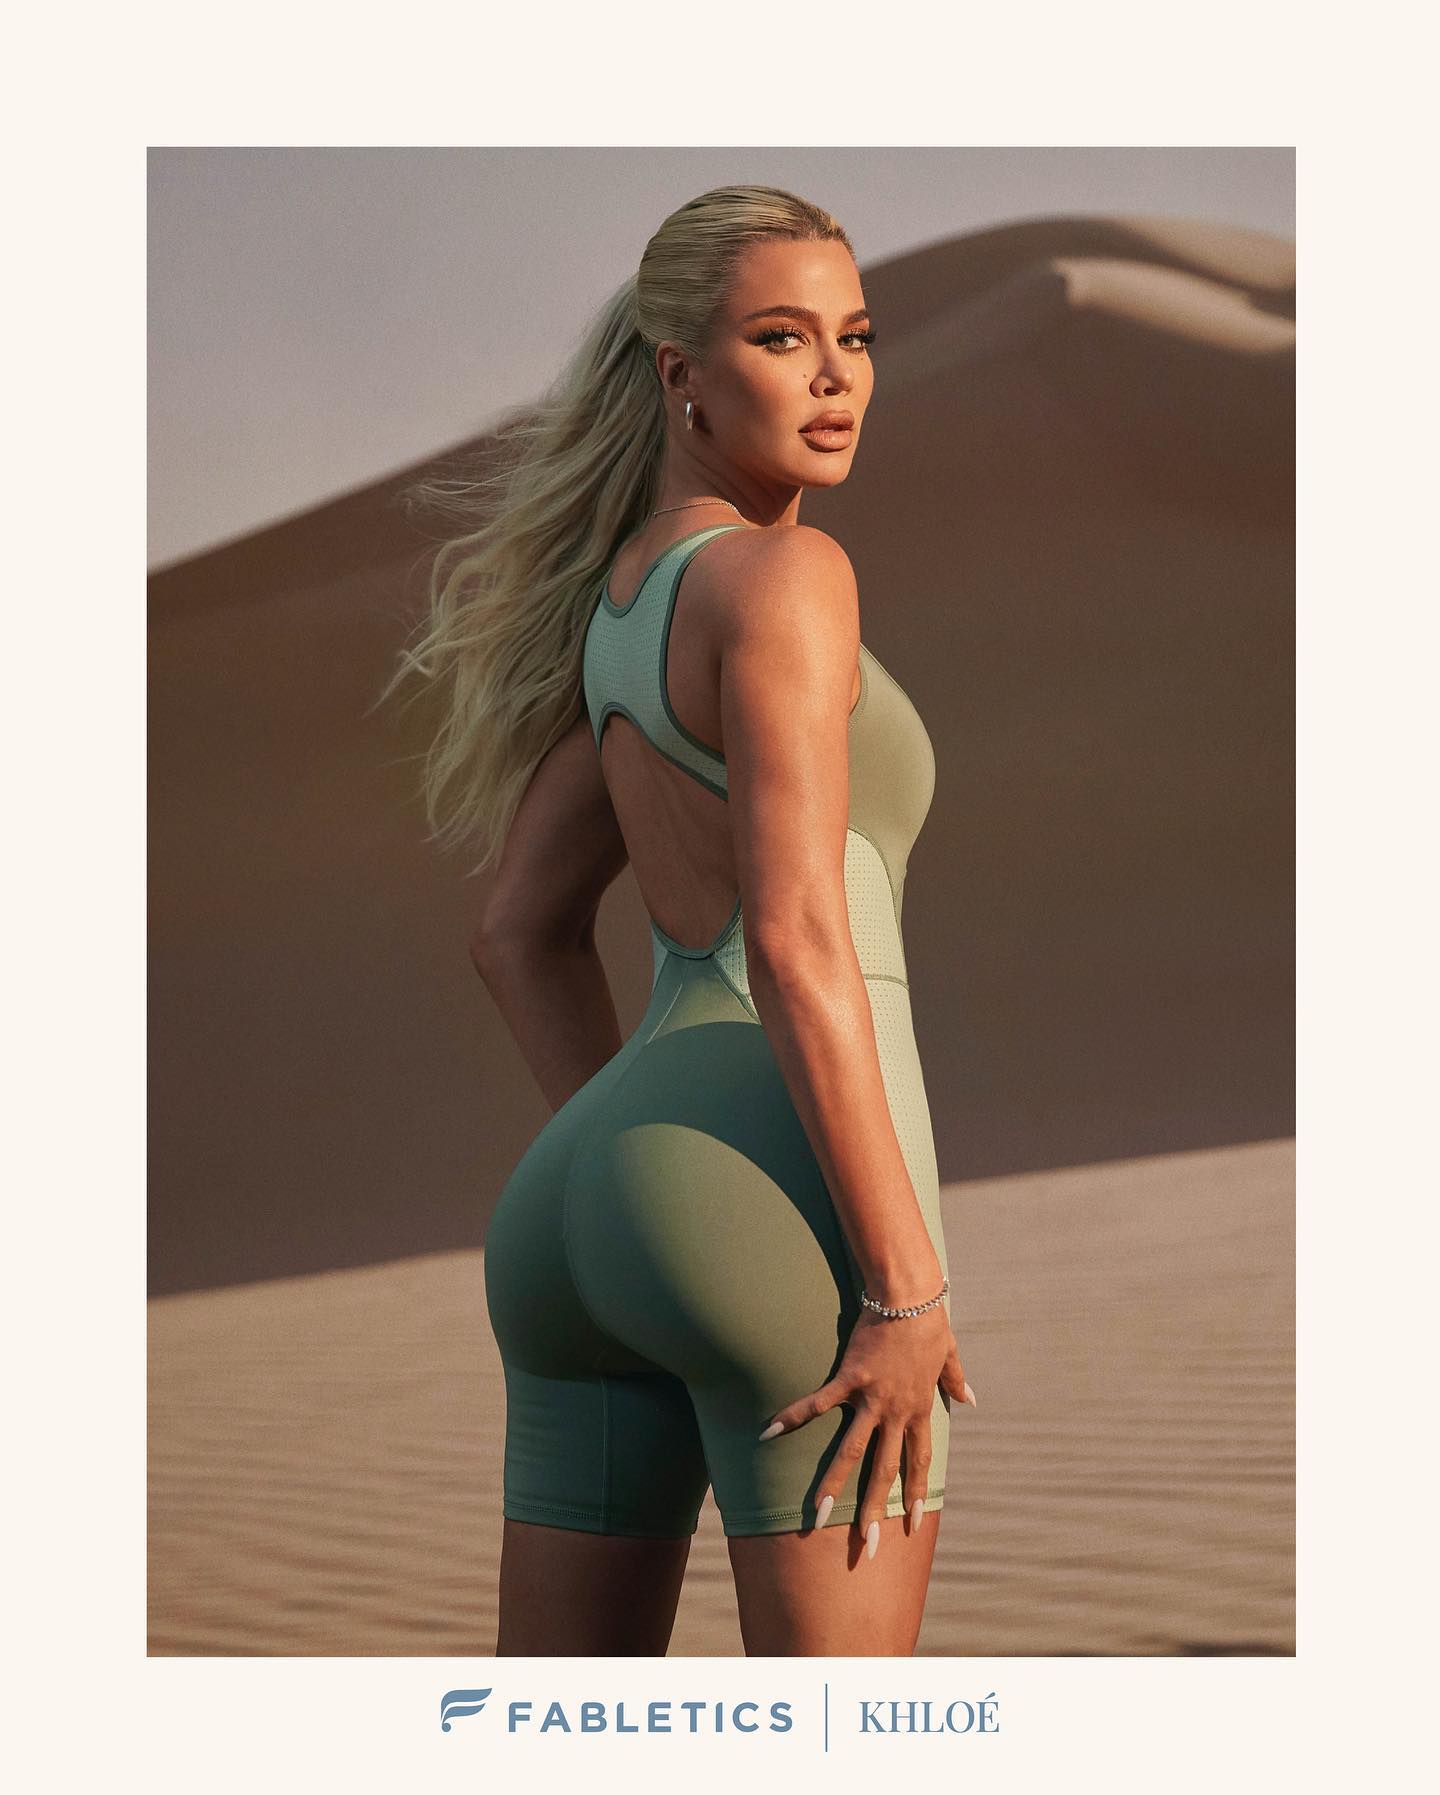 The snap, which displayed her plump backside, was Khloe's promo photo for the brand Fabletics